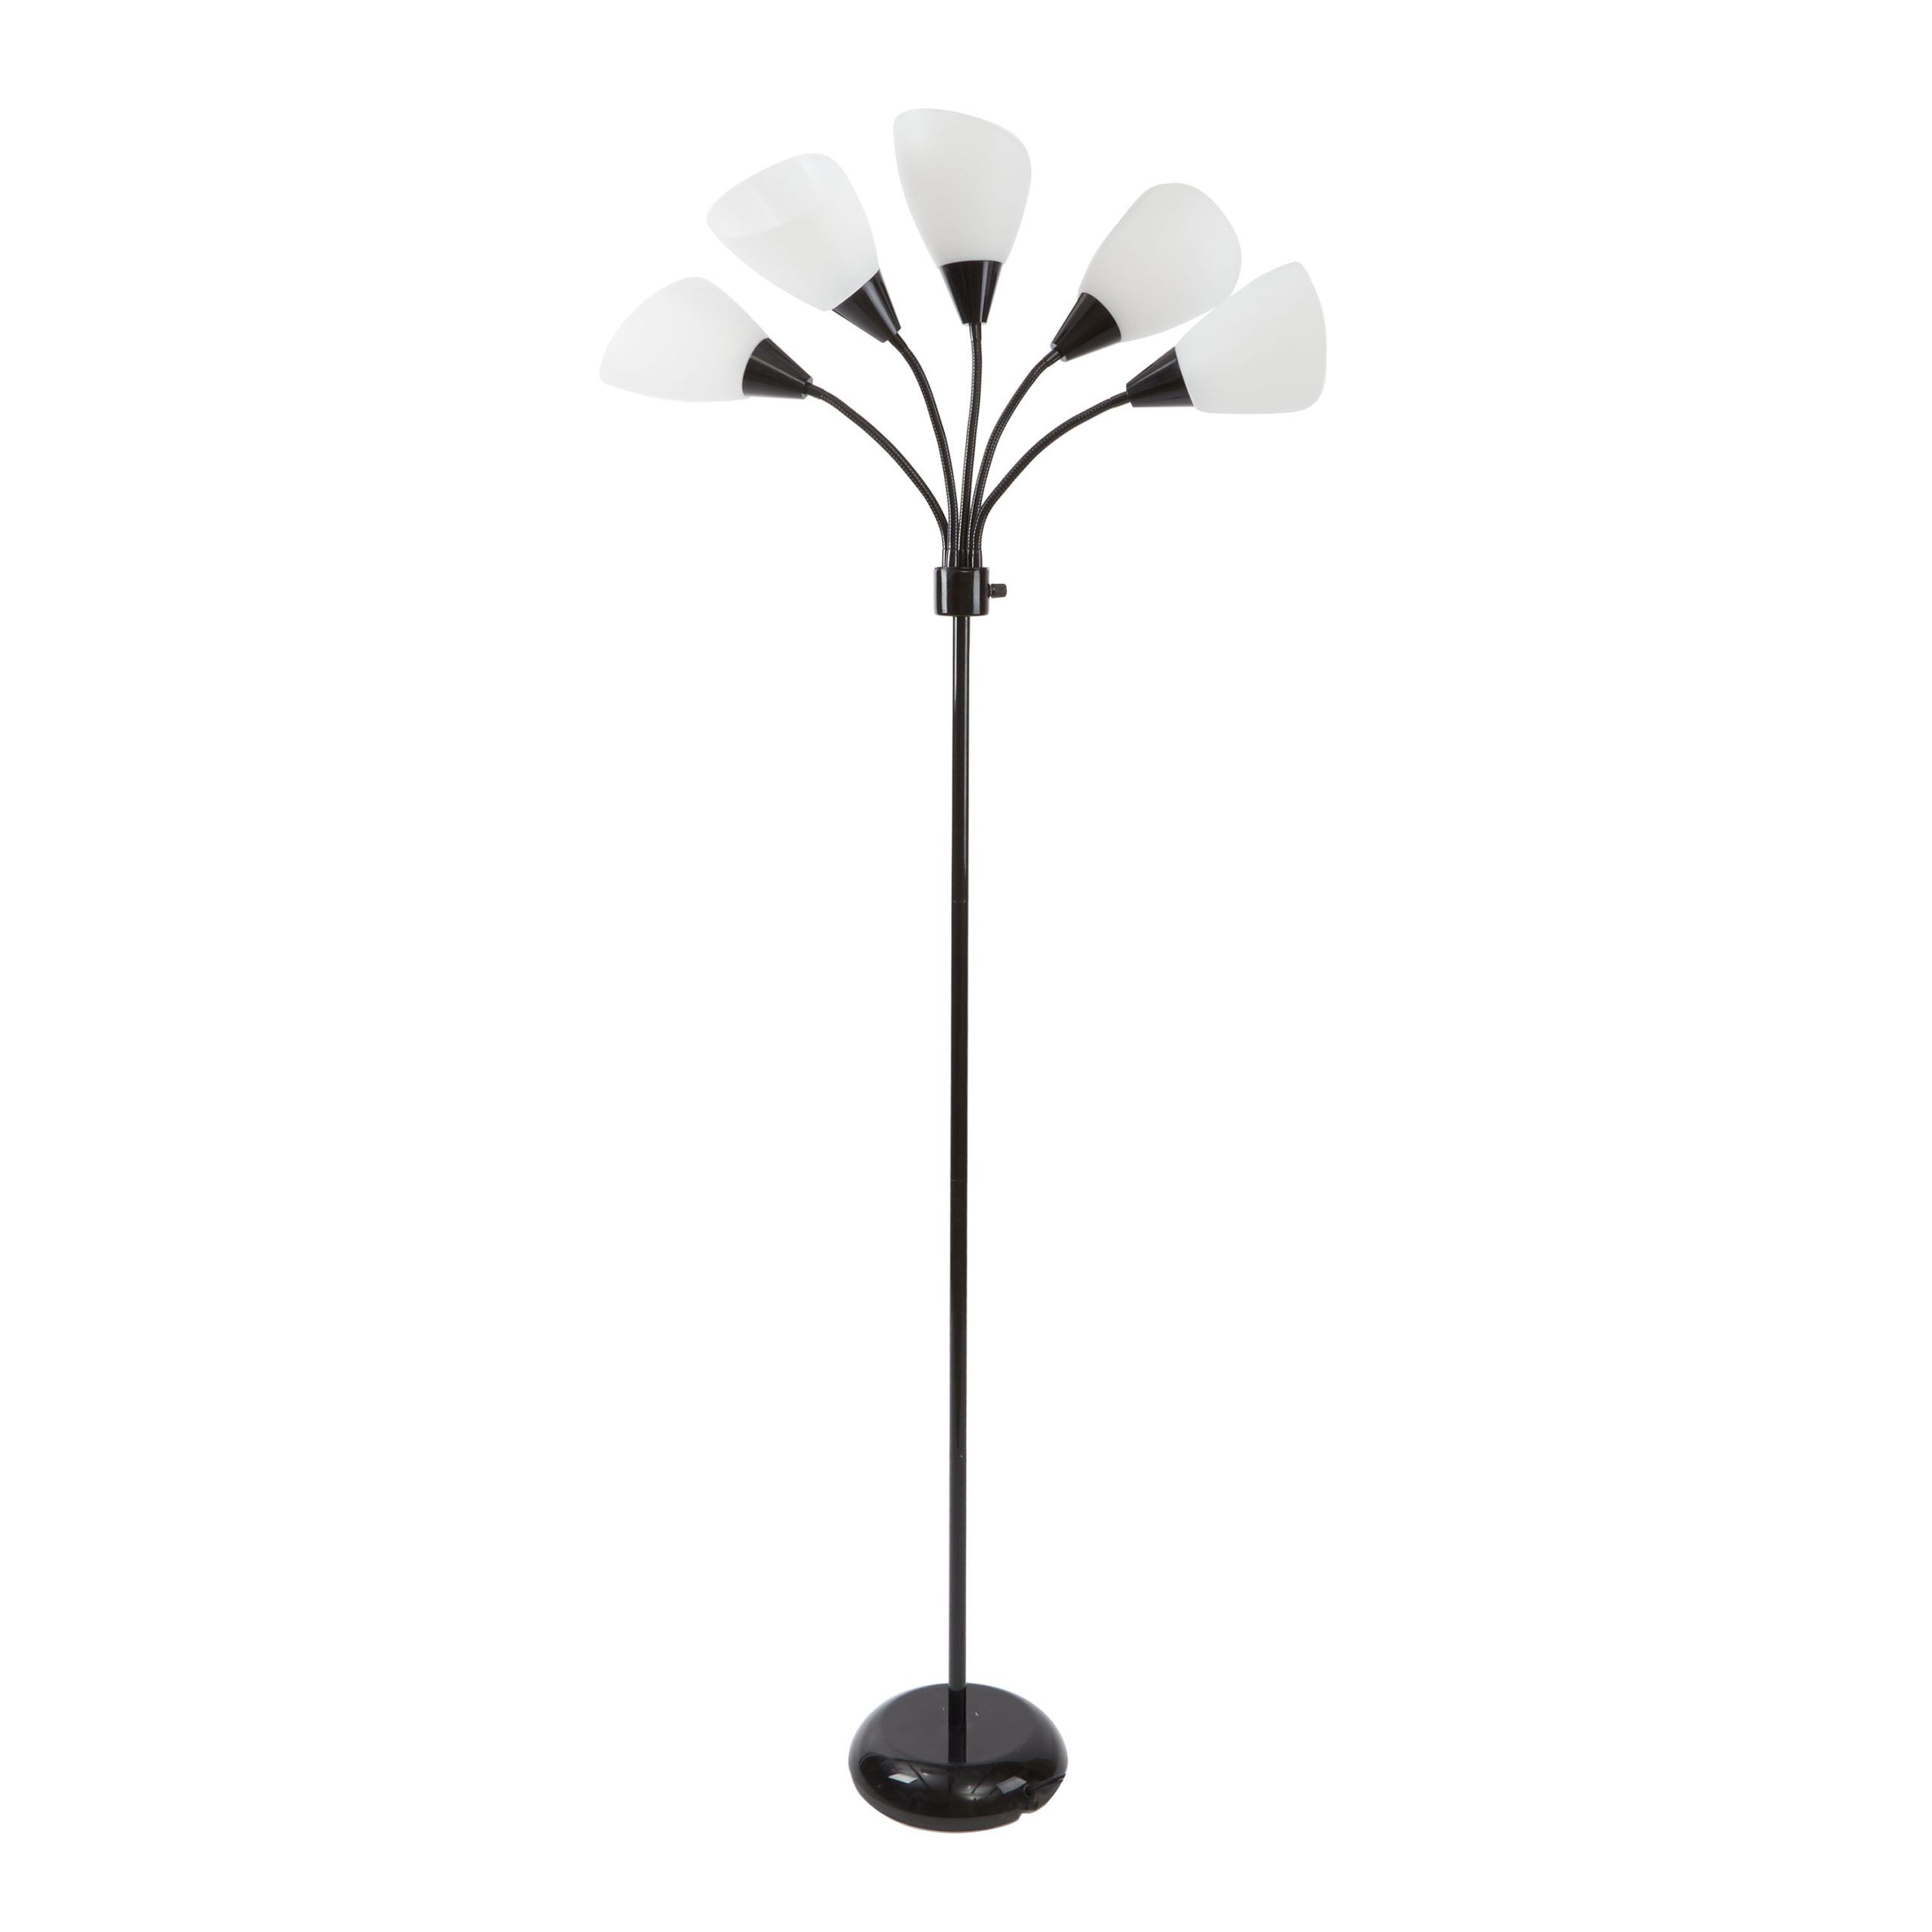 Mainstays 5 Light Metal Floor Lamp With White Shade, Black Finish –  Walmart Throughout Most Popular 5 Light Standing Lamps (View 12 of 15)